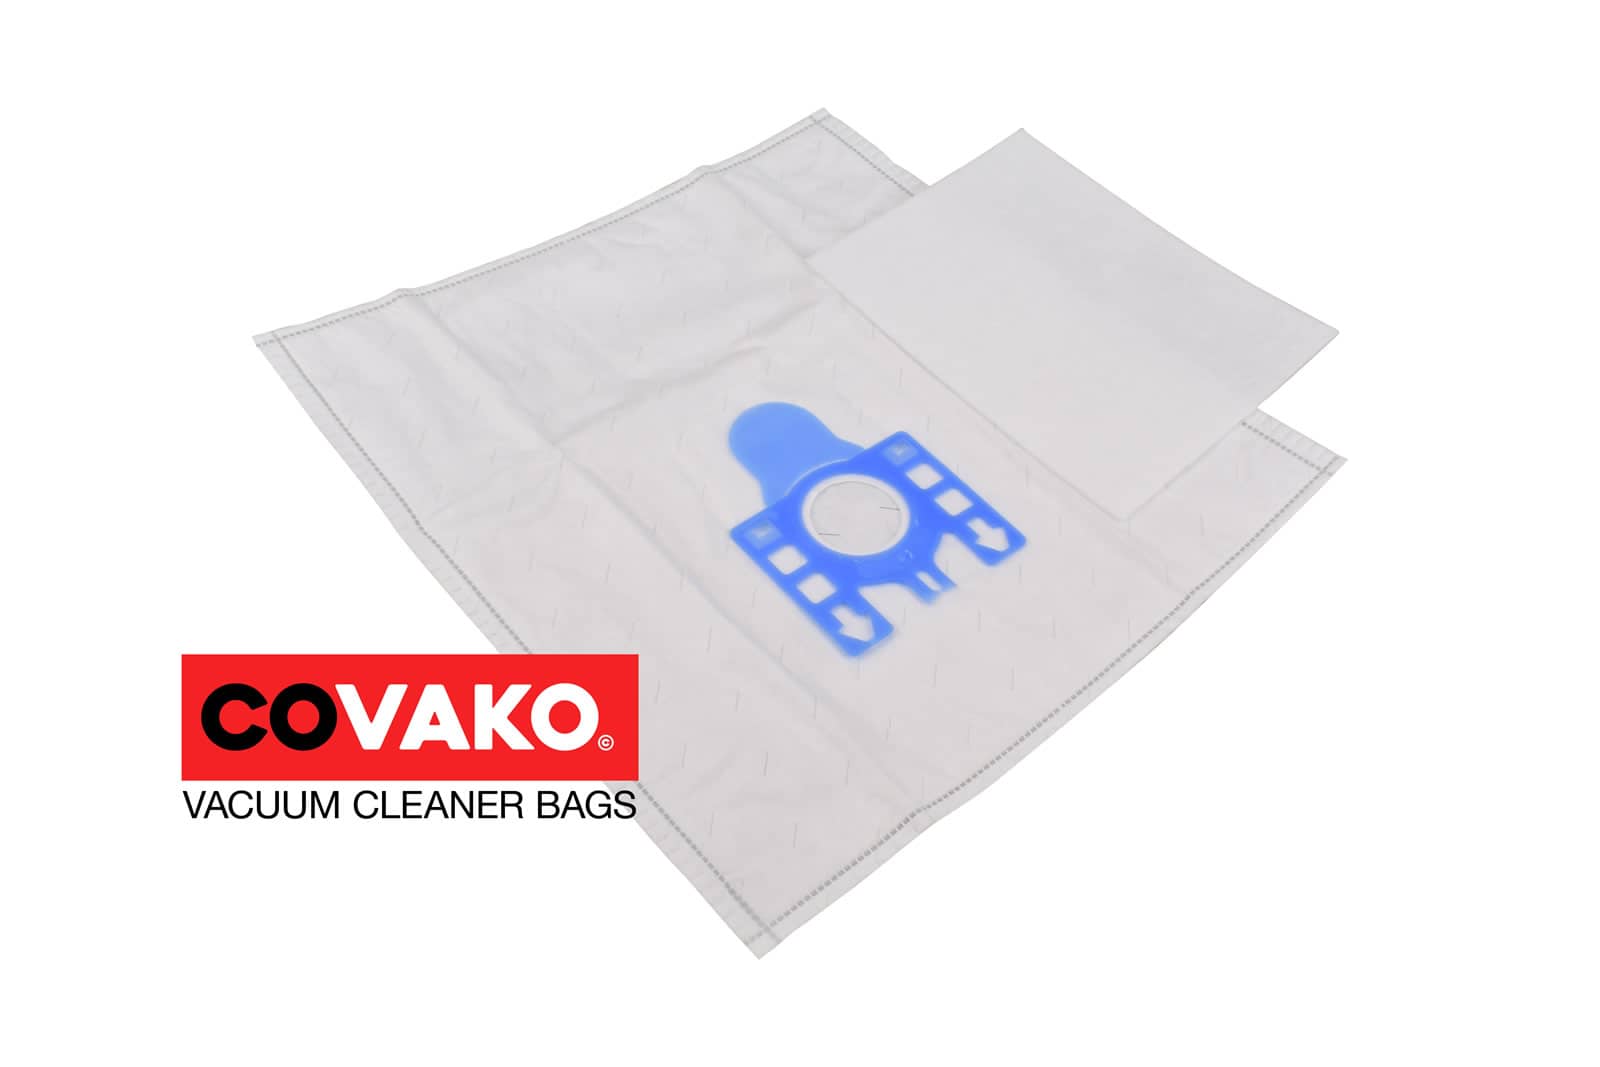 Miele Classic C1 Serie / Synthesis - Miele vacuum cleaner bags